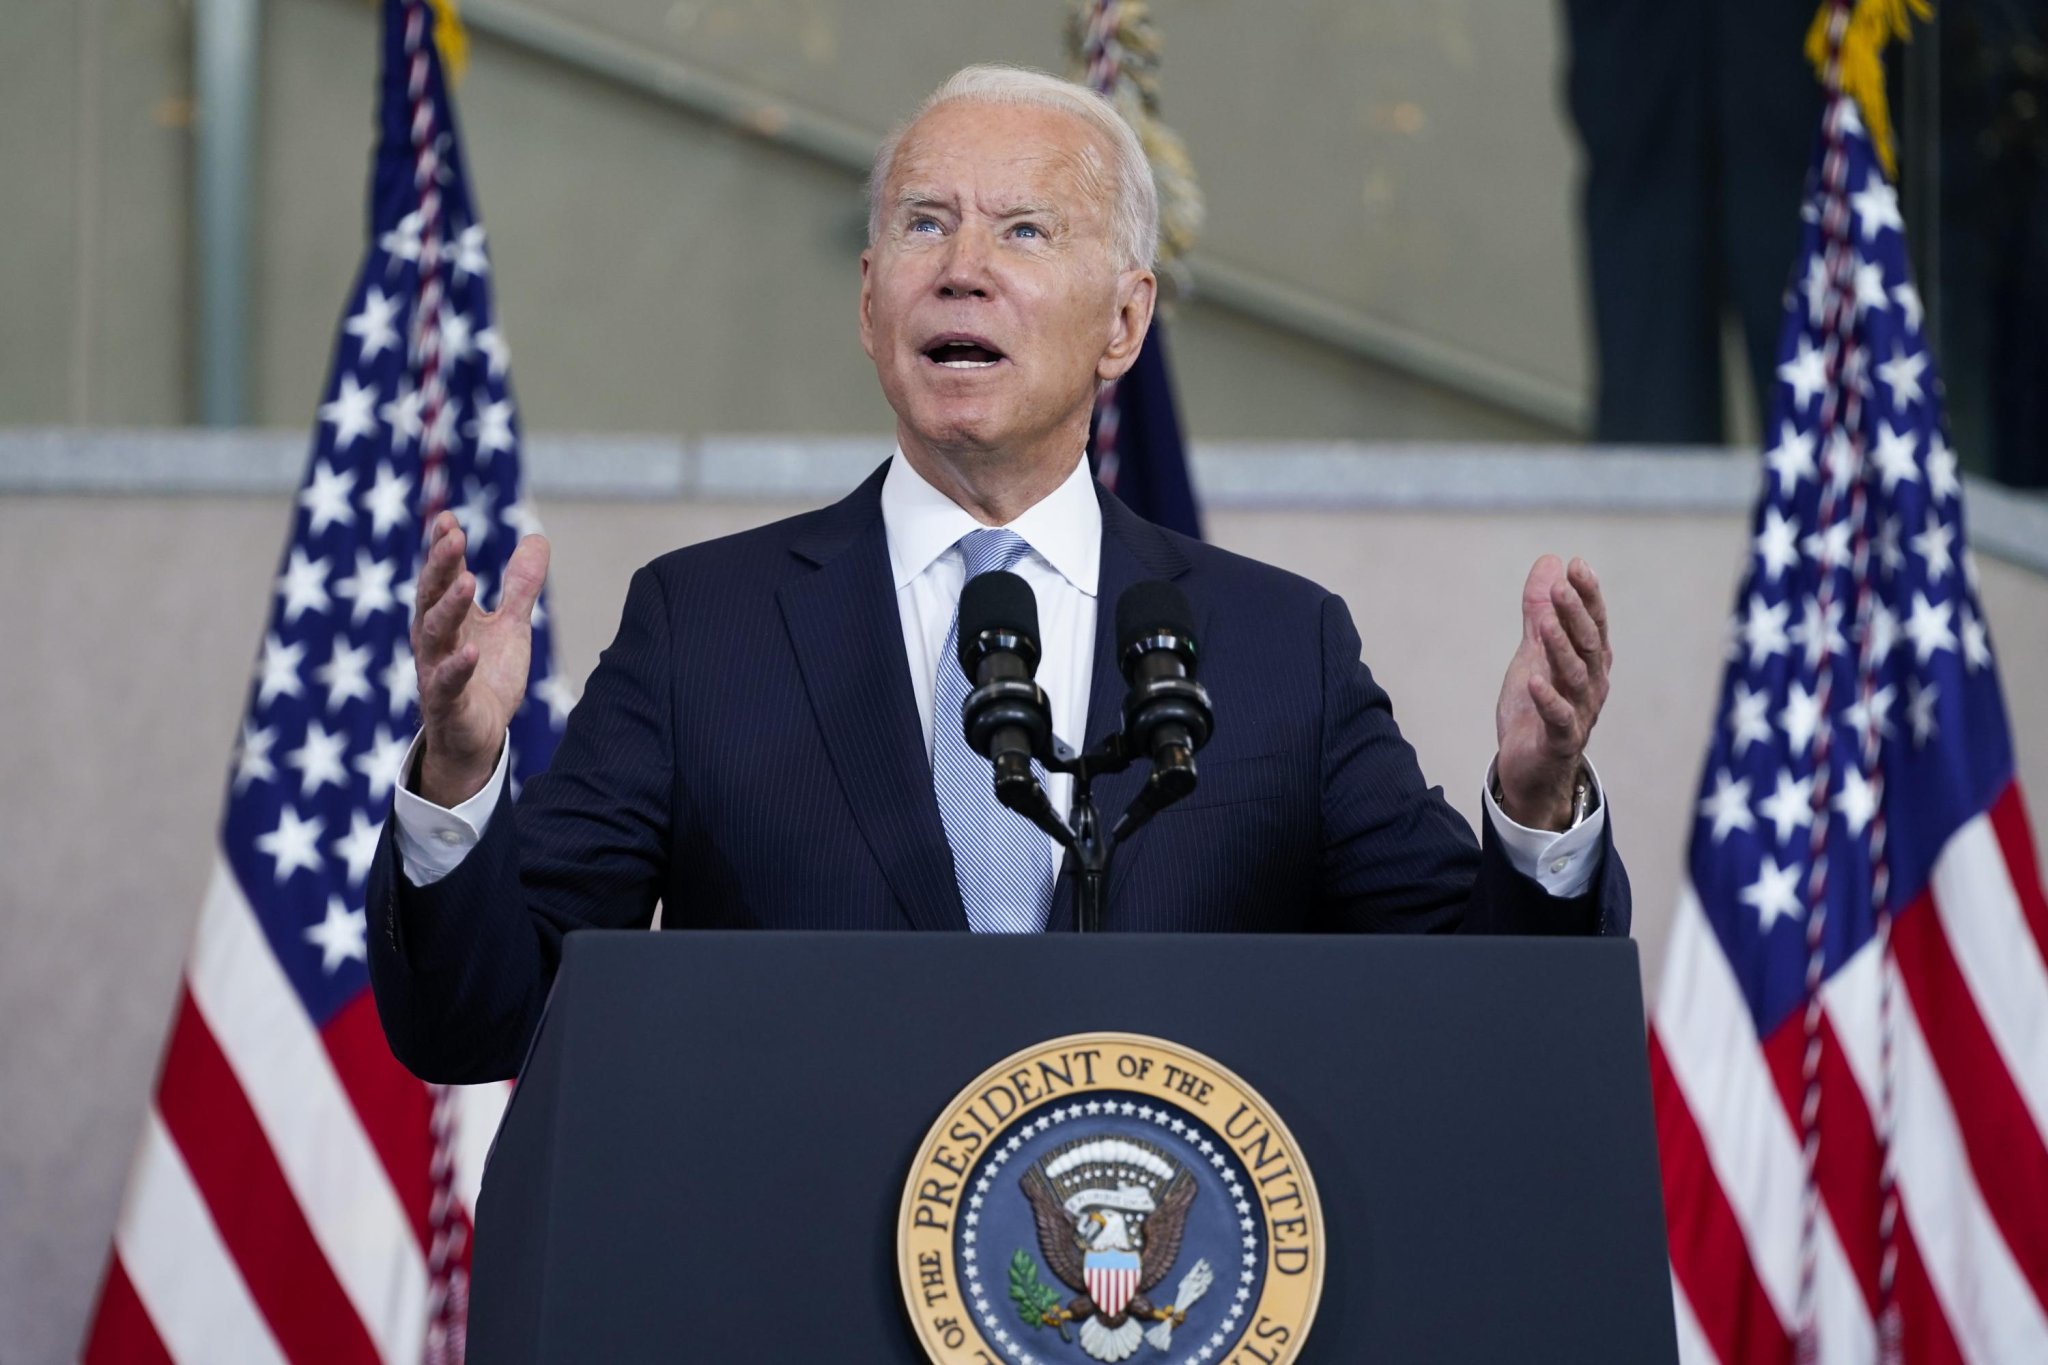 Biden pushed to speak out more as US democracy concerns grow